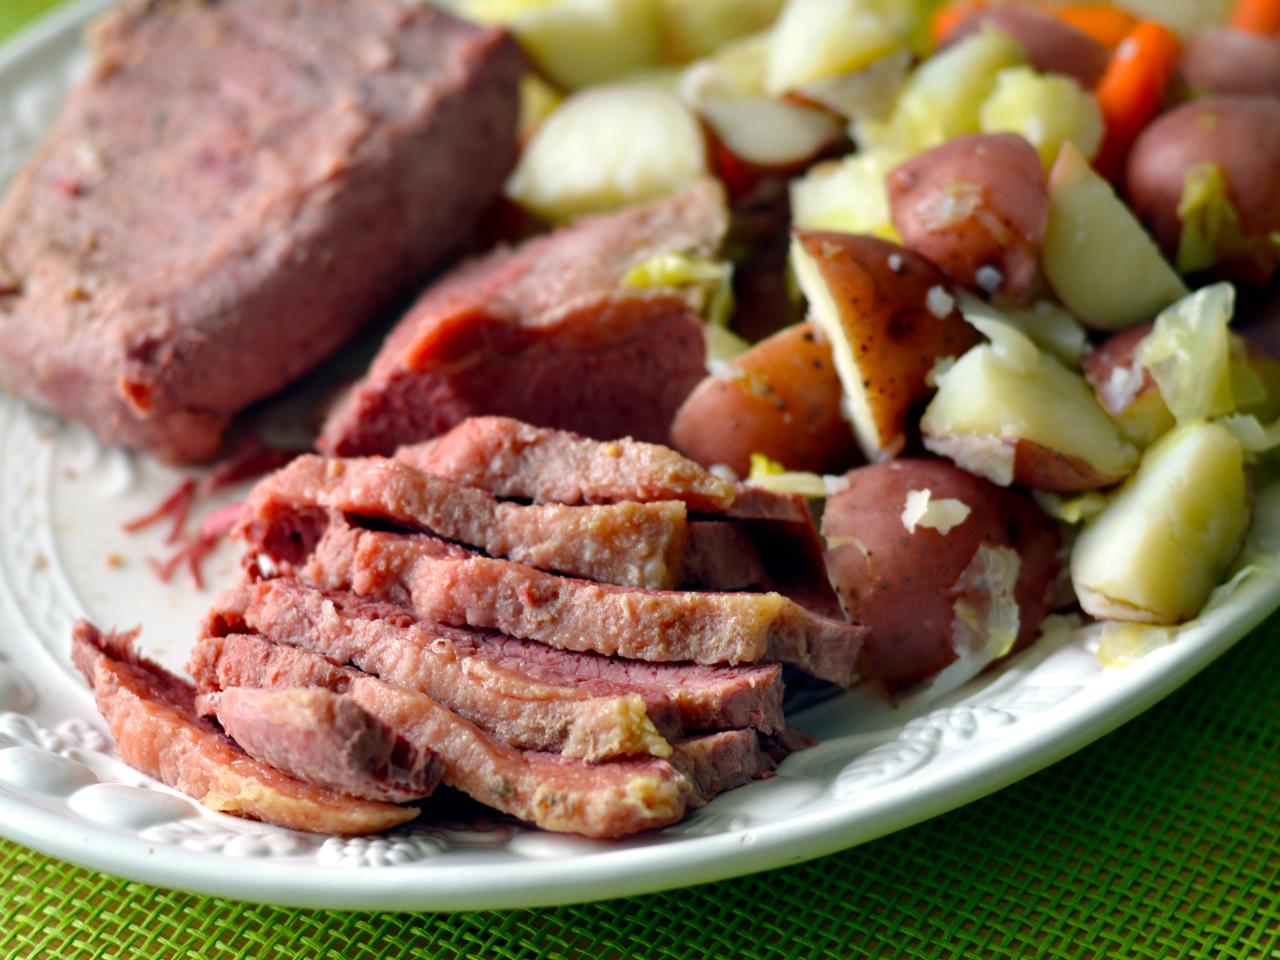 Instant Pot Corned Beef - The Girl Who Ate Everything